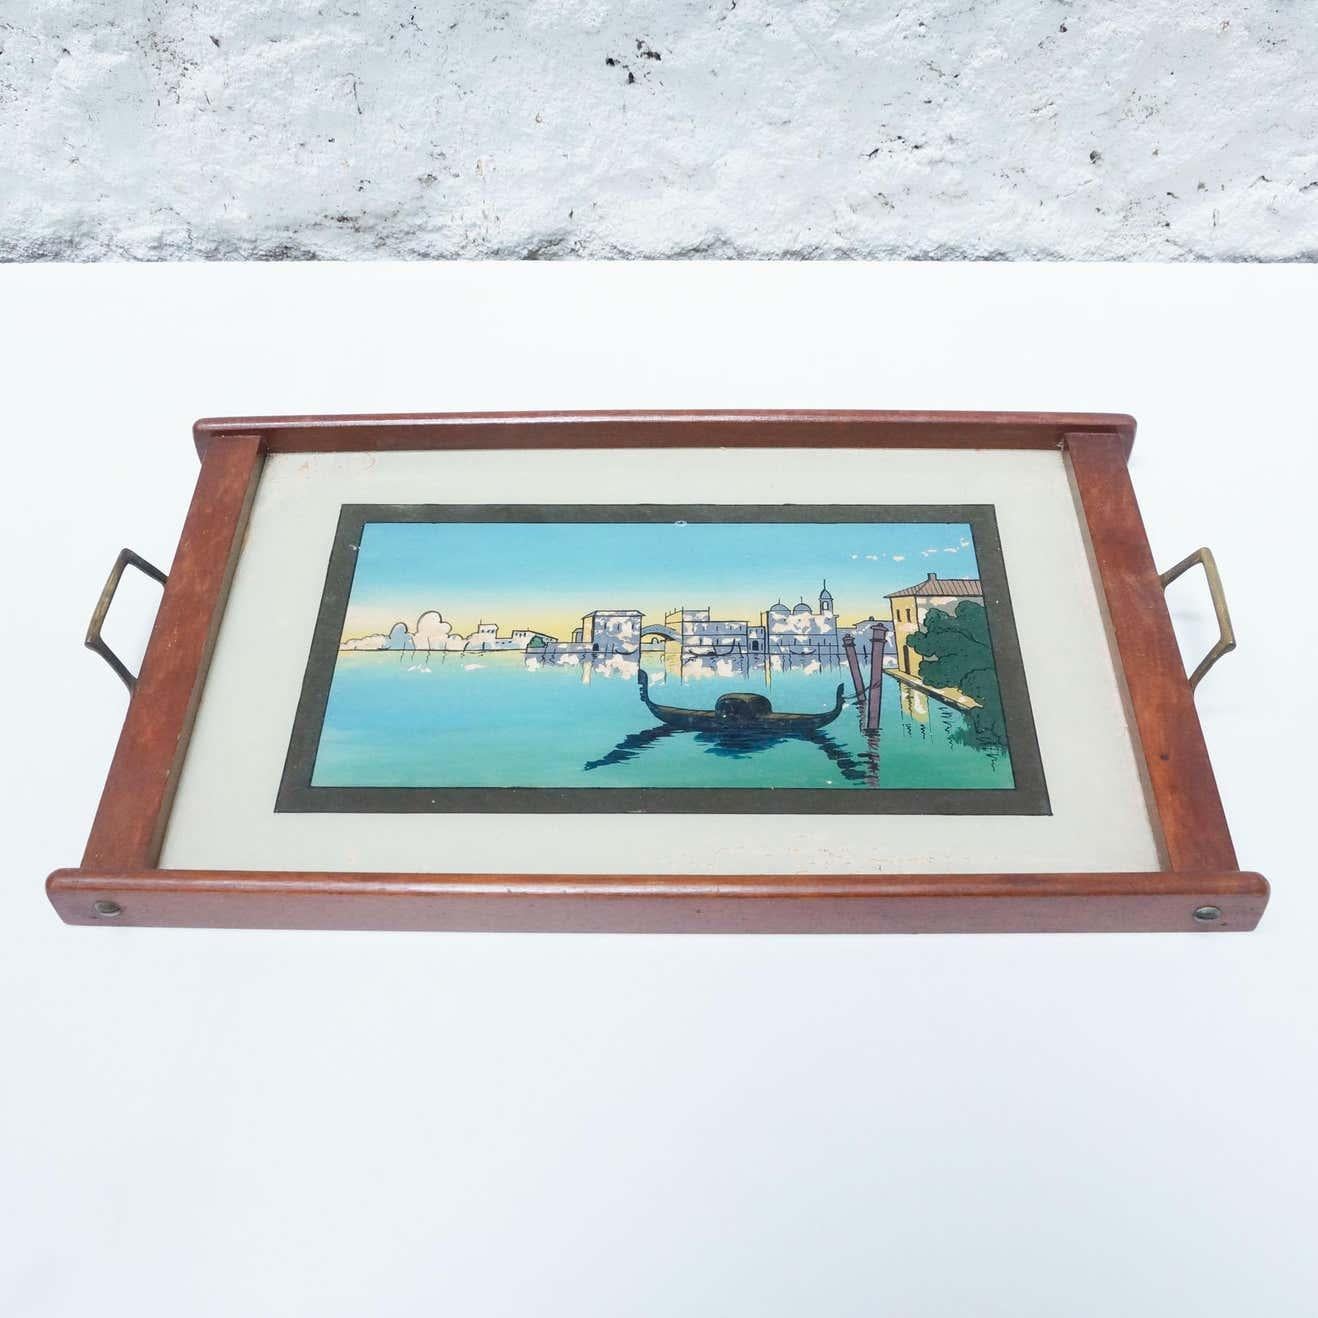 Antique glass and wood tray with Venice Landscape, circa 1930.
By unknown manufacturer from Europe.

In original condition, with some visible signs of previous use and age, preserving a beautiful patina.

Materials:
Wood
Glass
Metal

Dimensions:
D